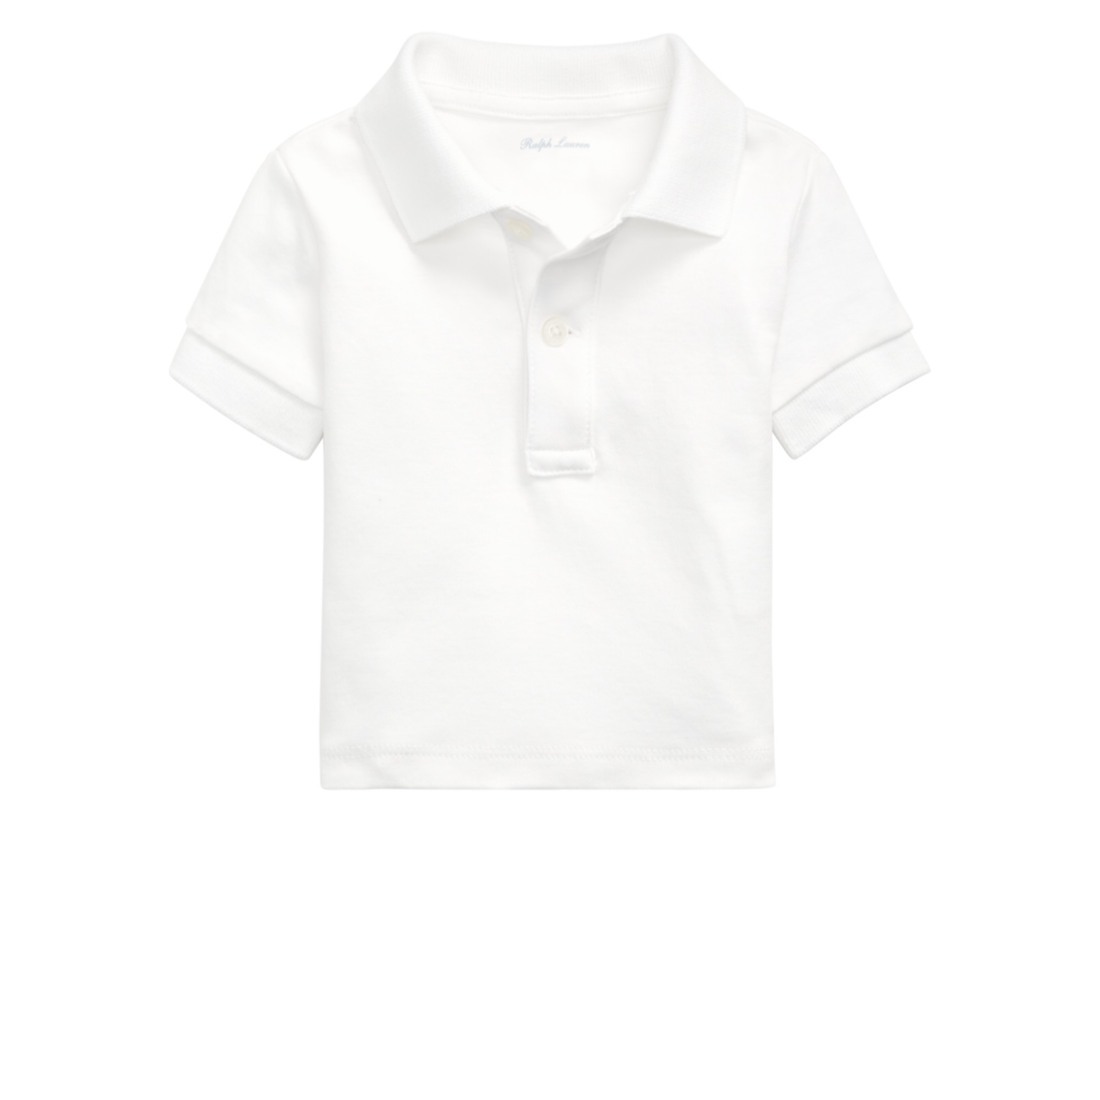 Logical Composer cleanse Baby Boy Polo Shirt